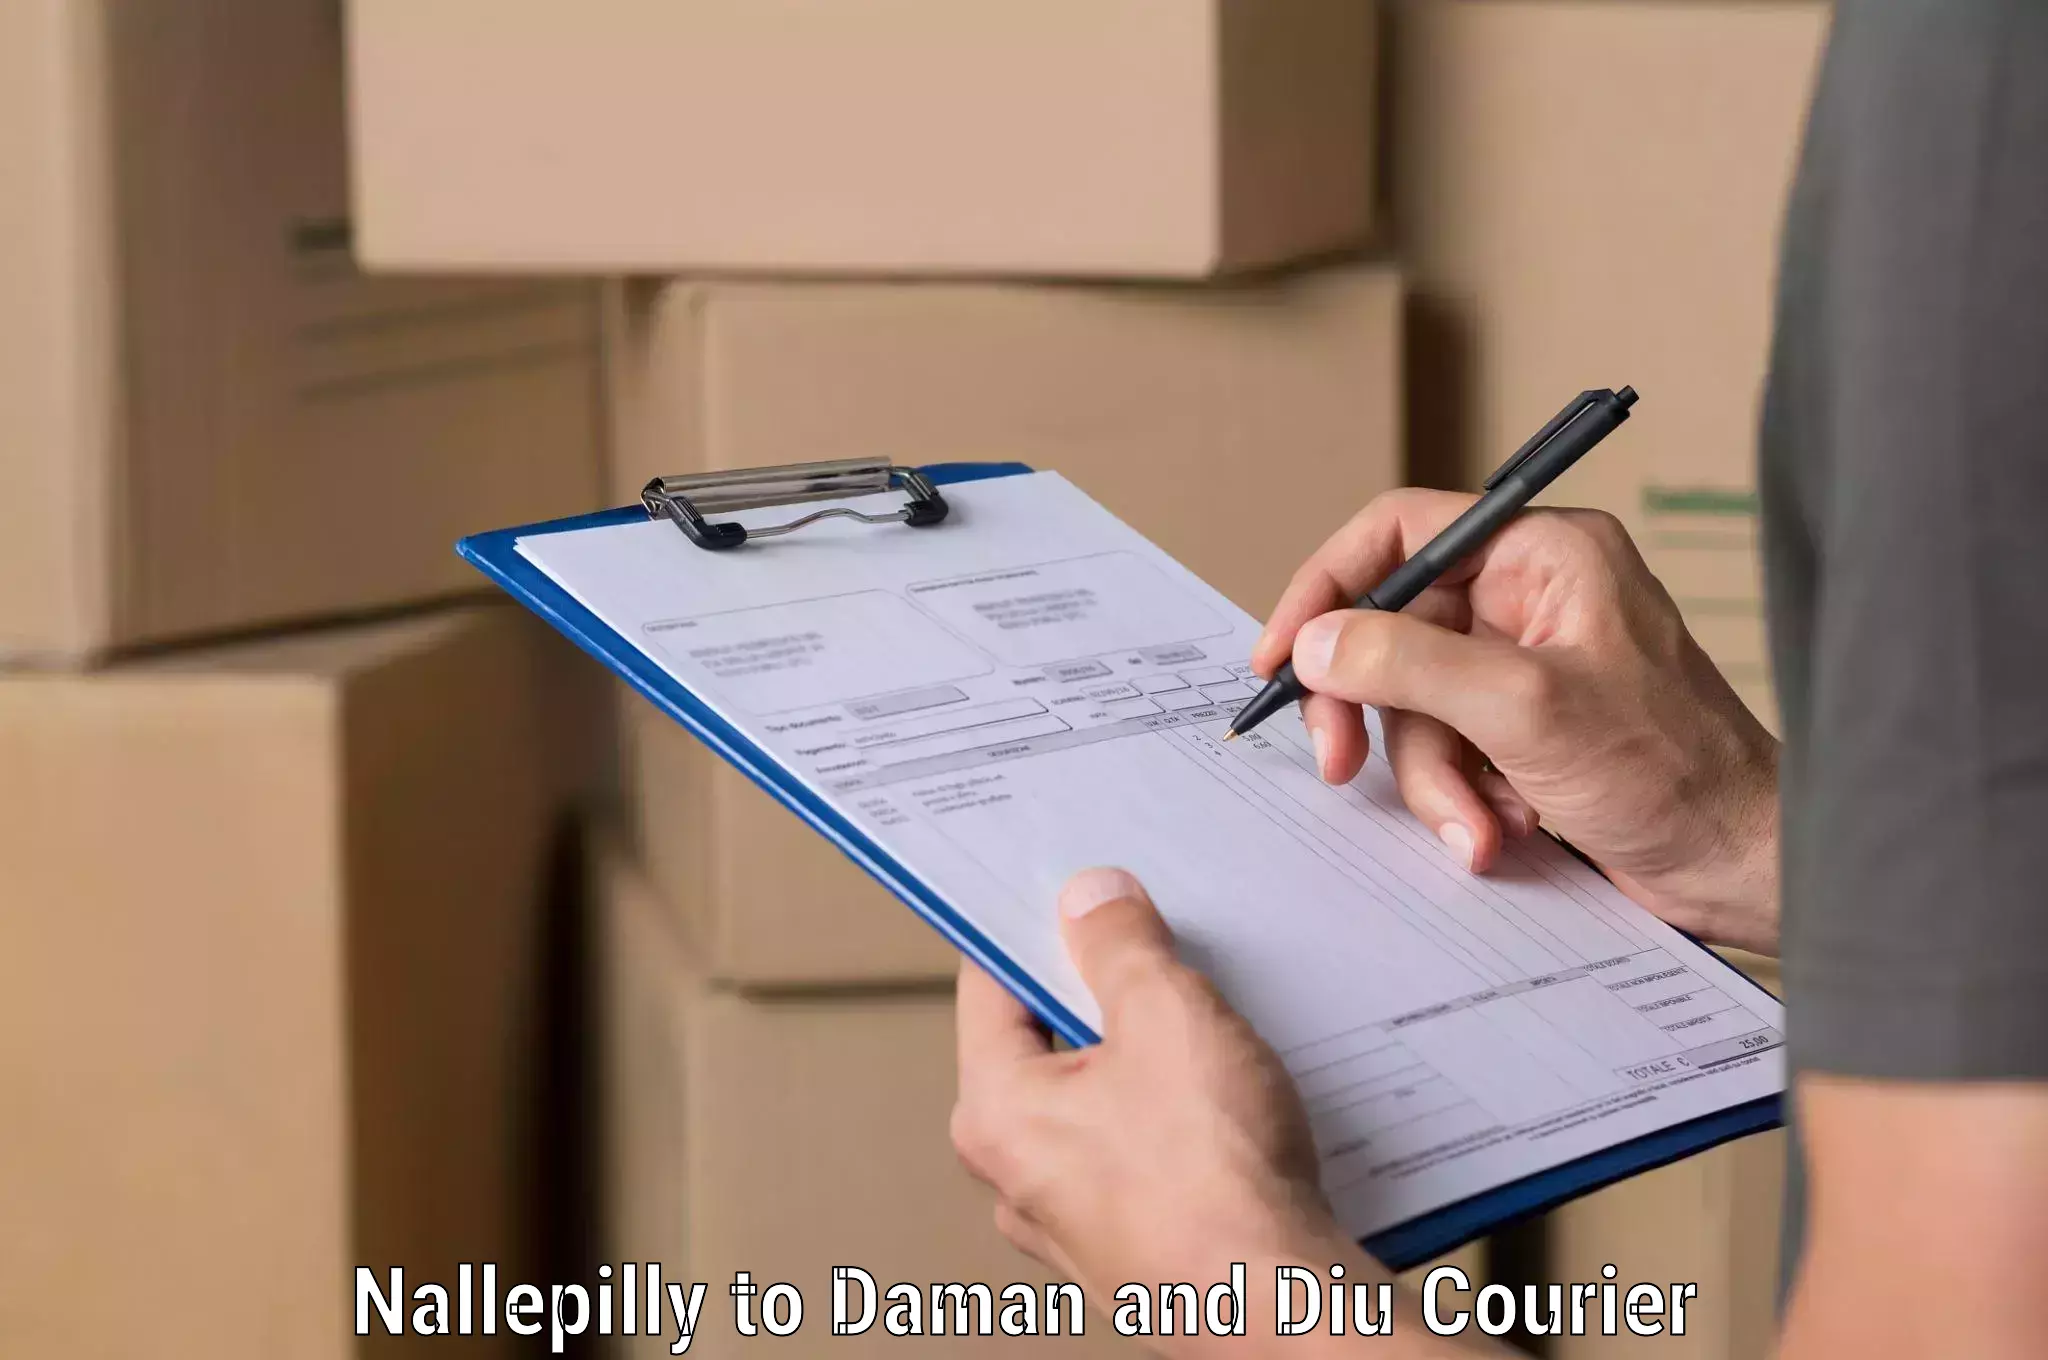 Optimized delivery routes in Nallepilly to Diu